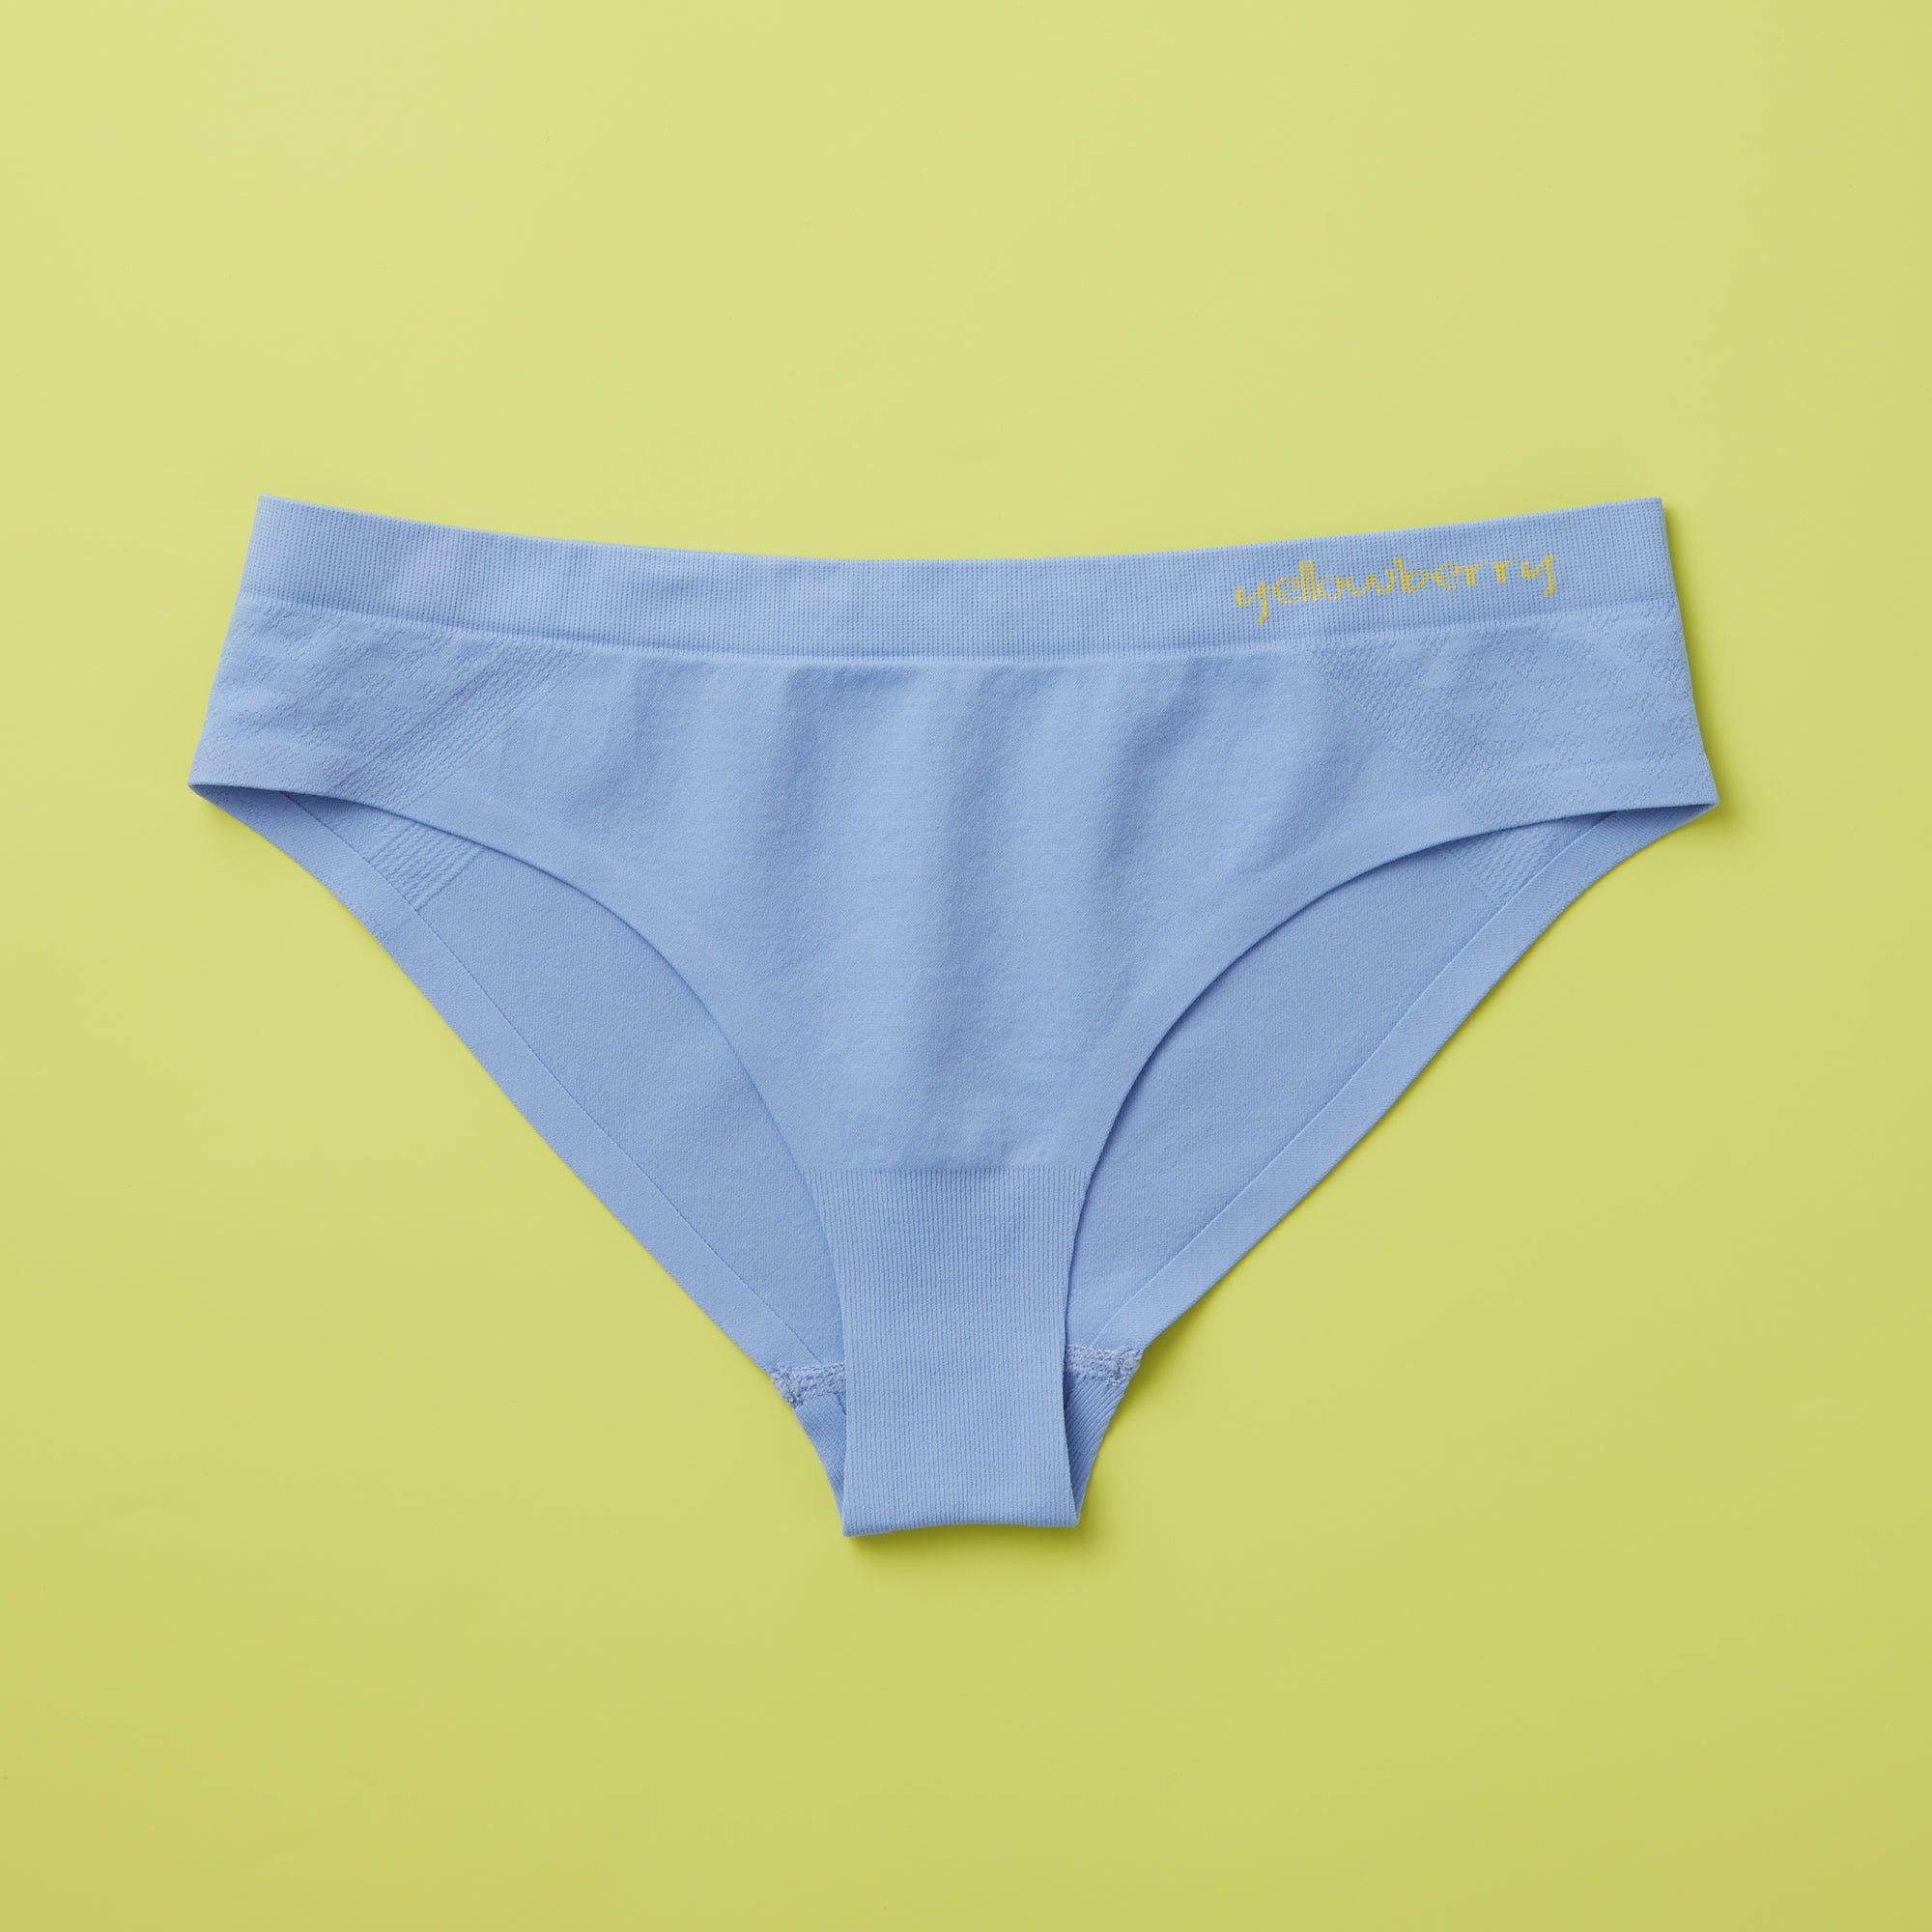 Difference Between No-Show and Seamless Underwear